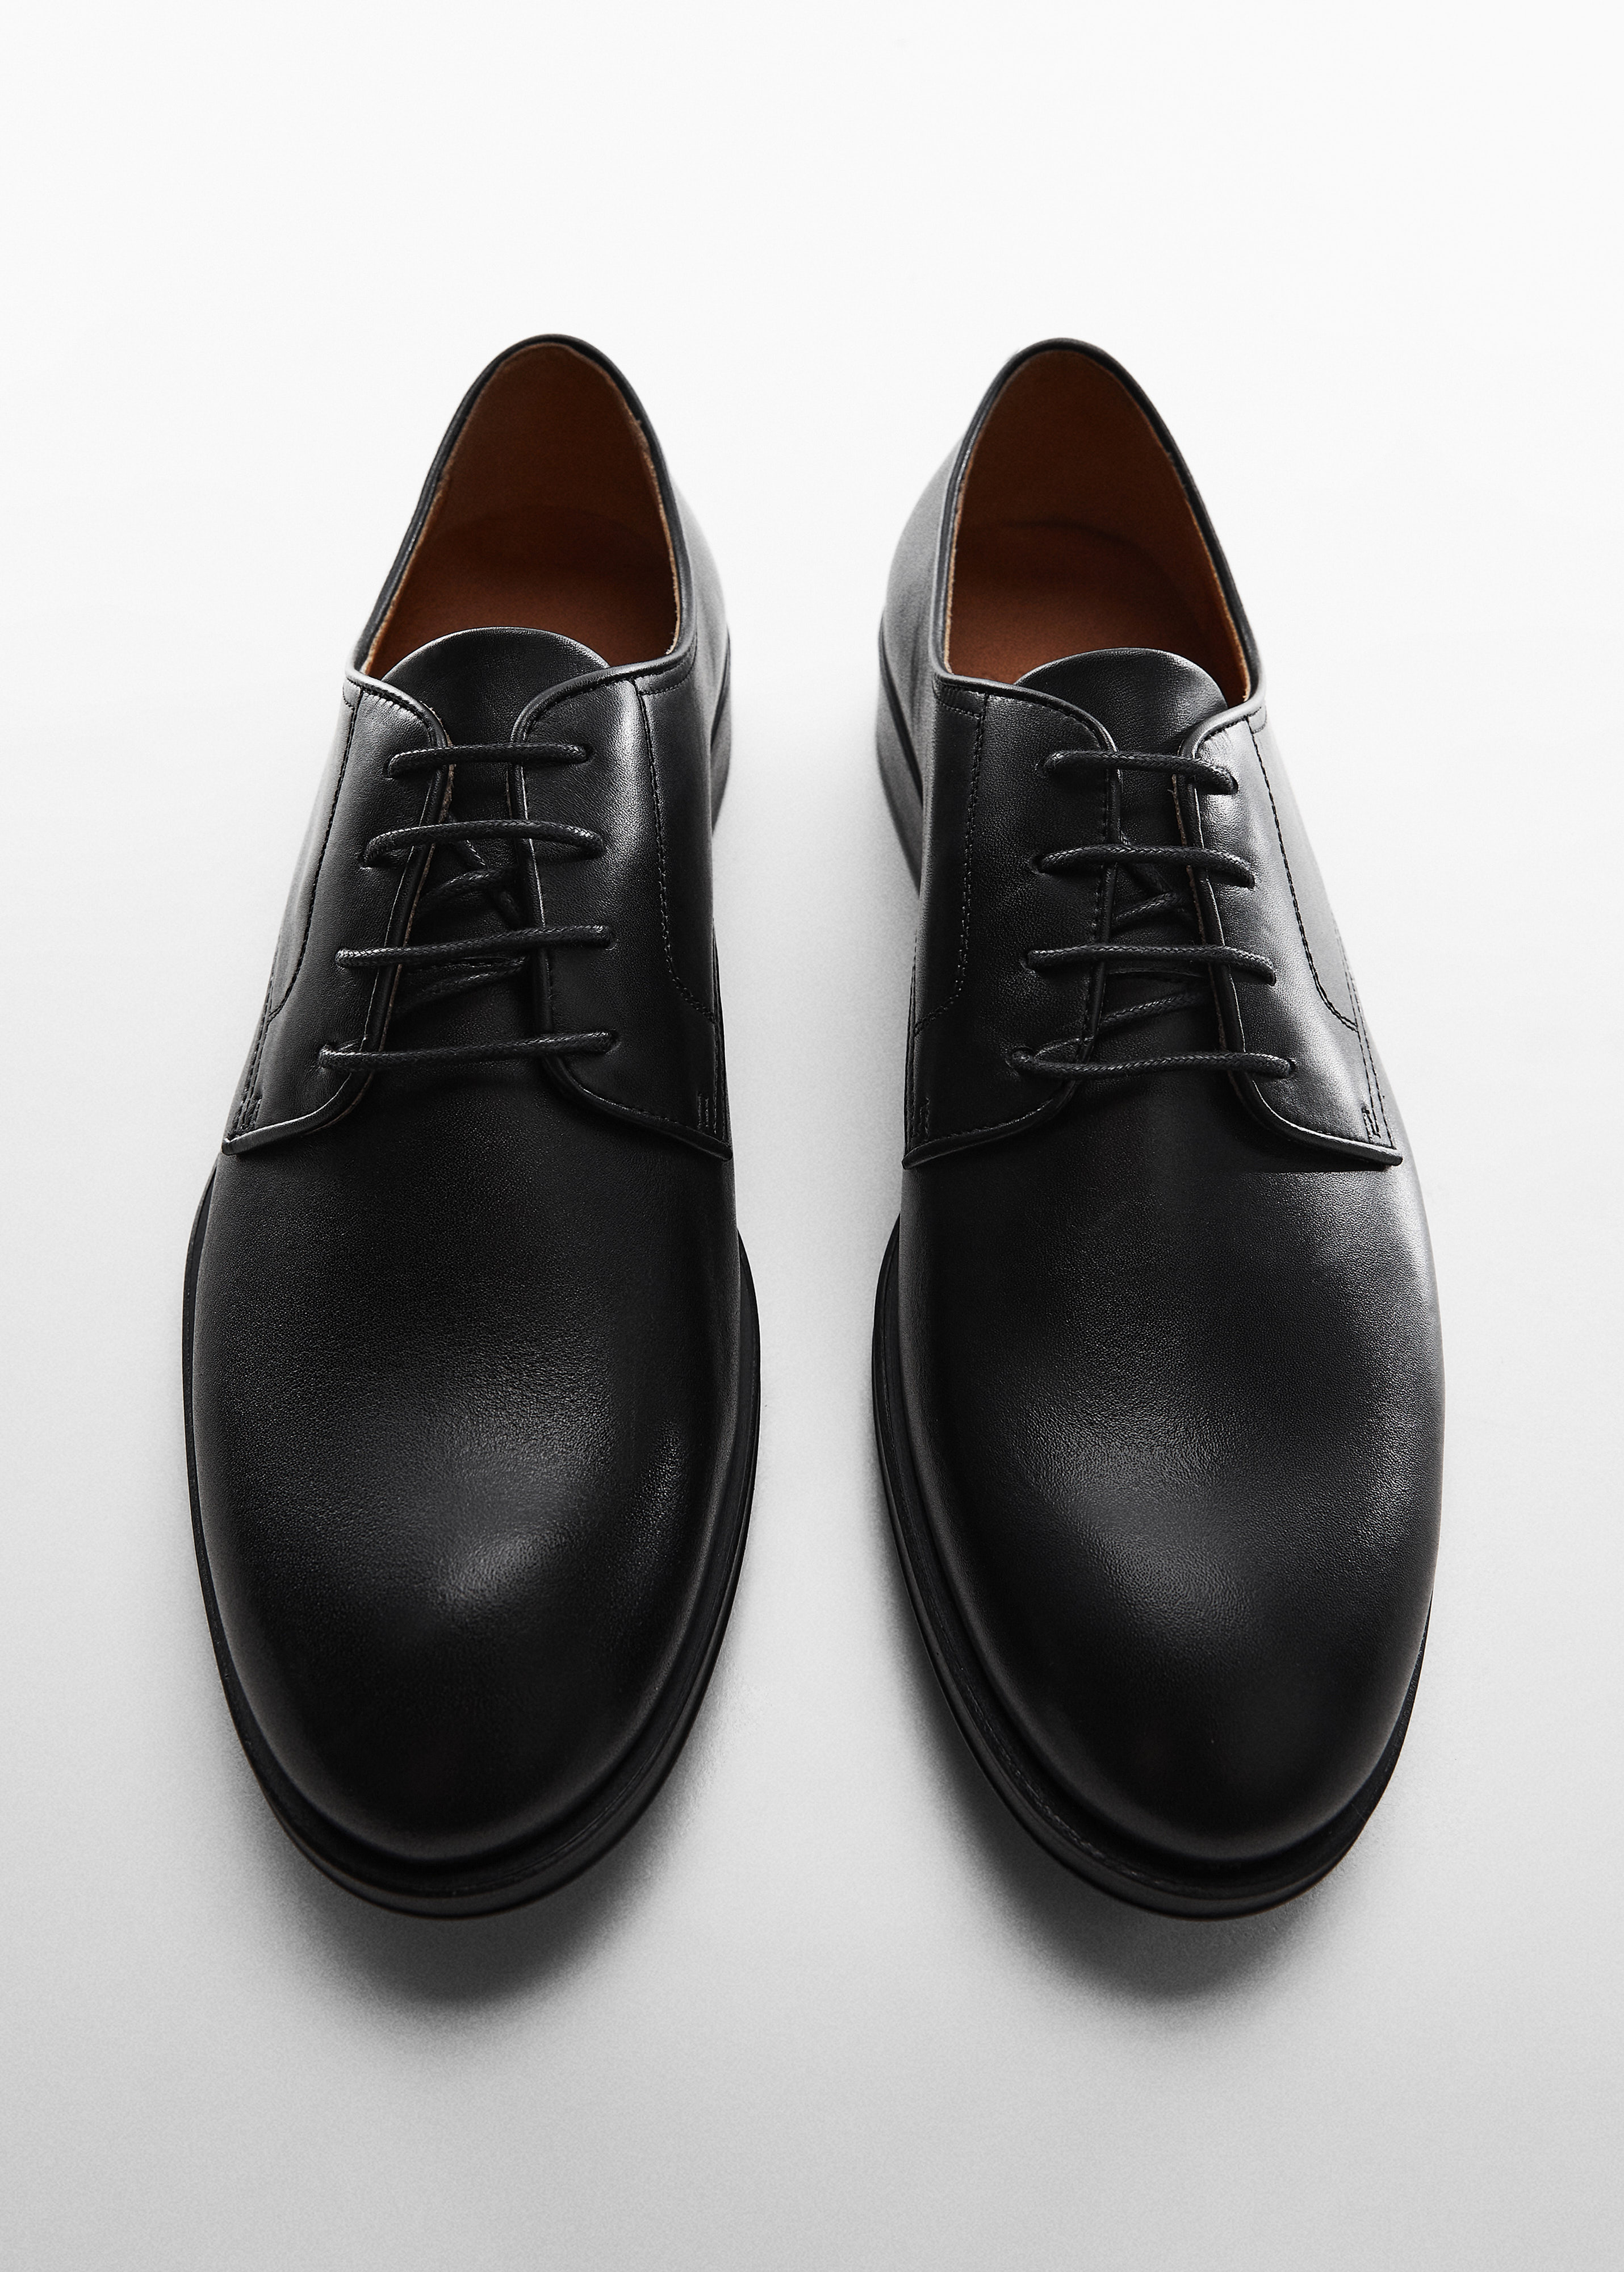 Leather suit shoes - Details of the article 5